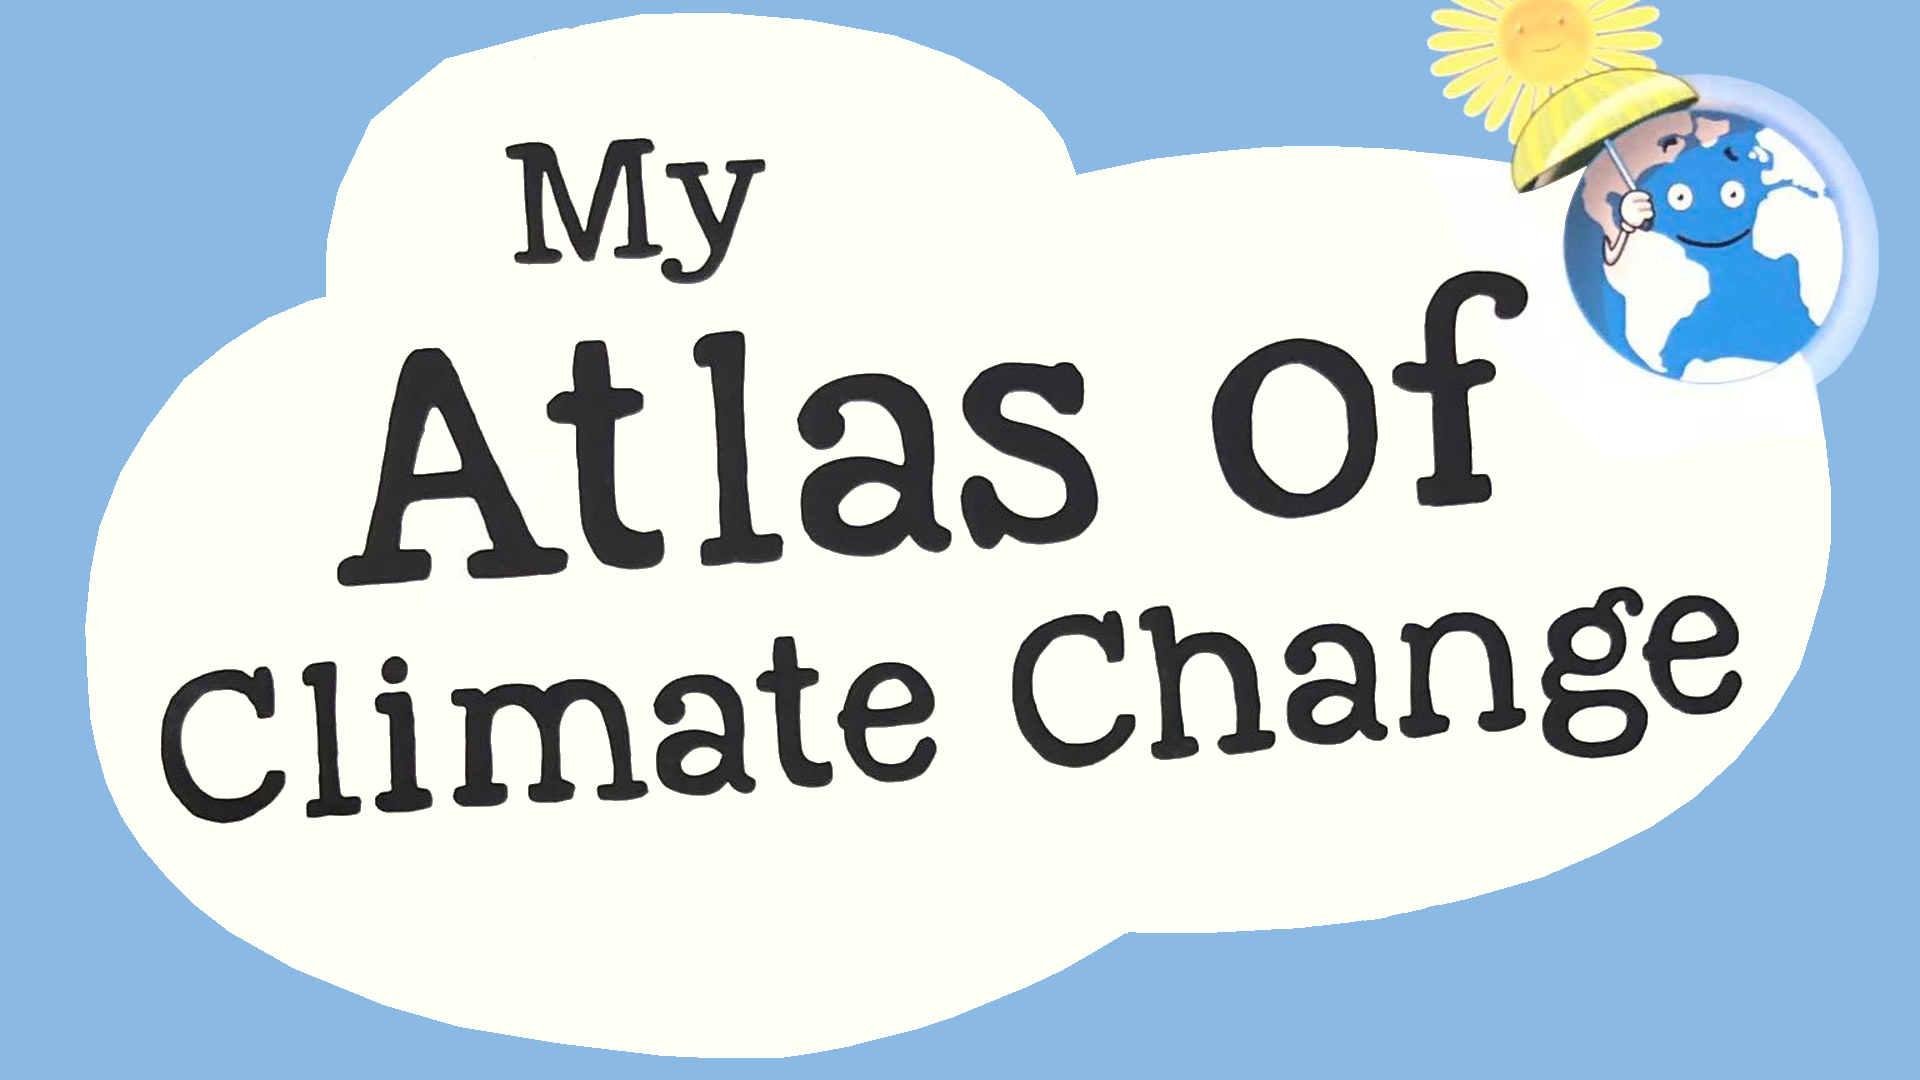 My atlas of climate change